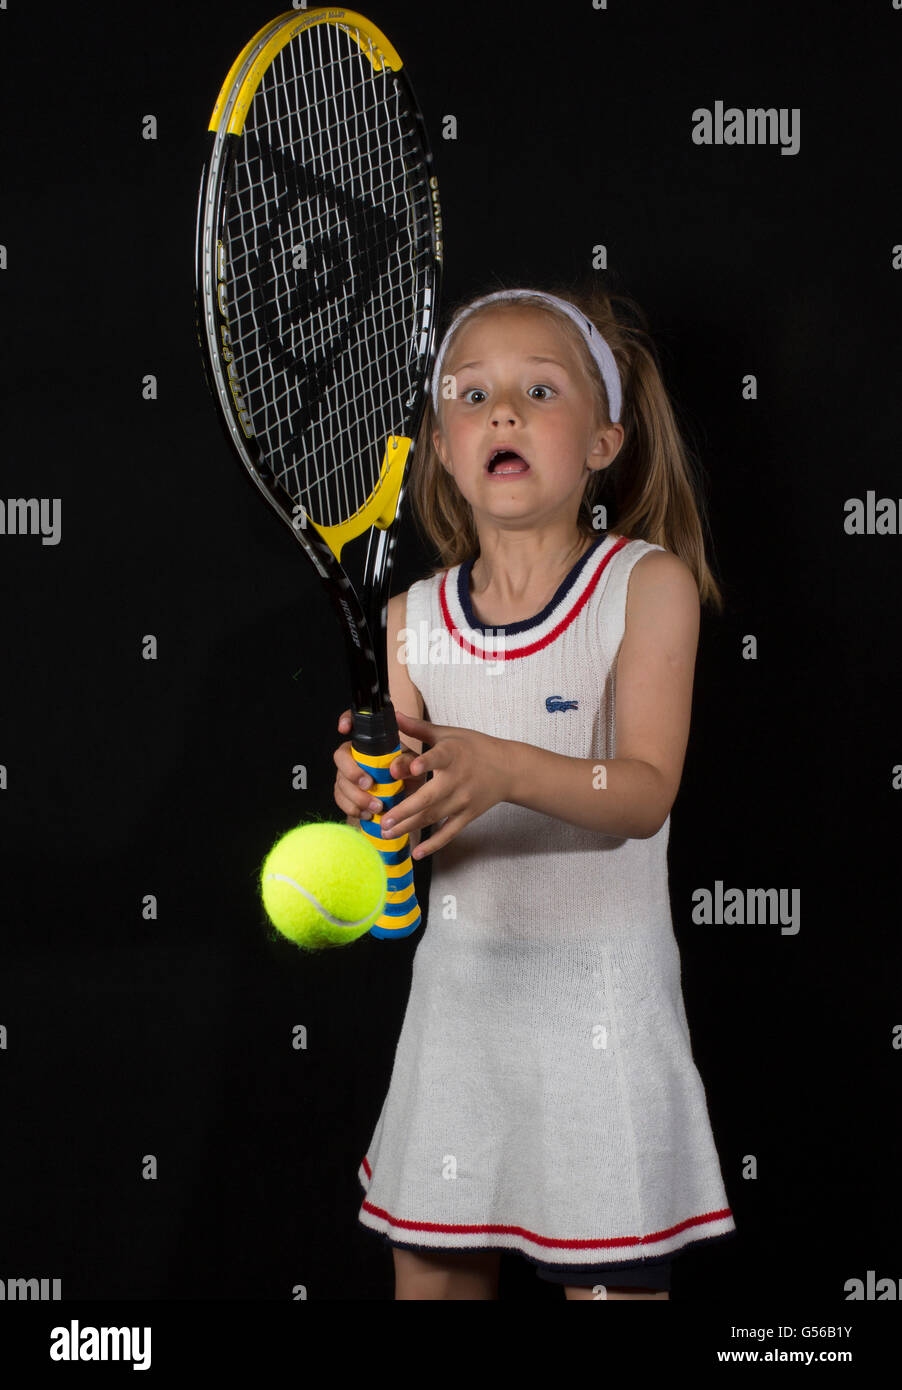 humorous portrait of a young girl playing tennis Stock Photo